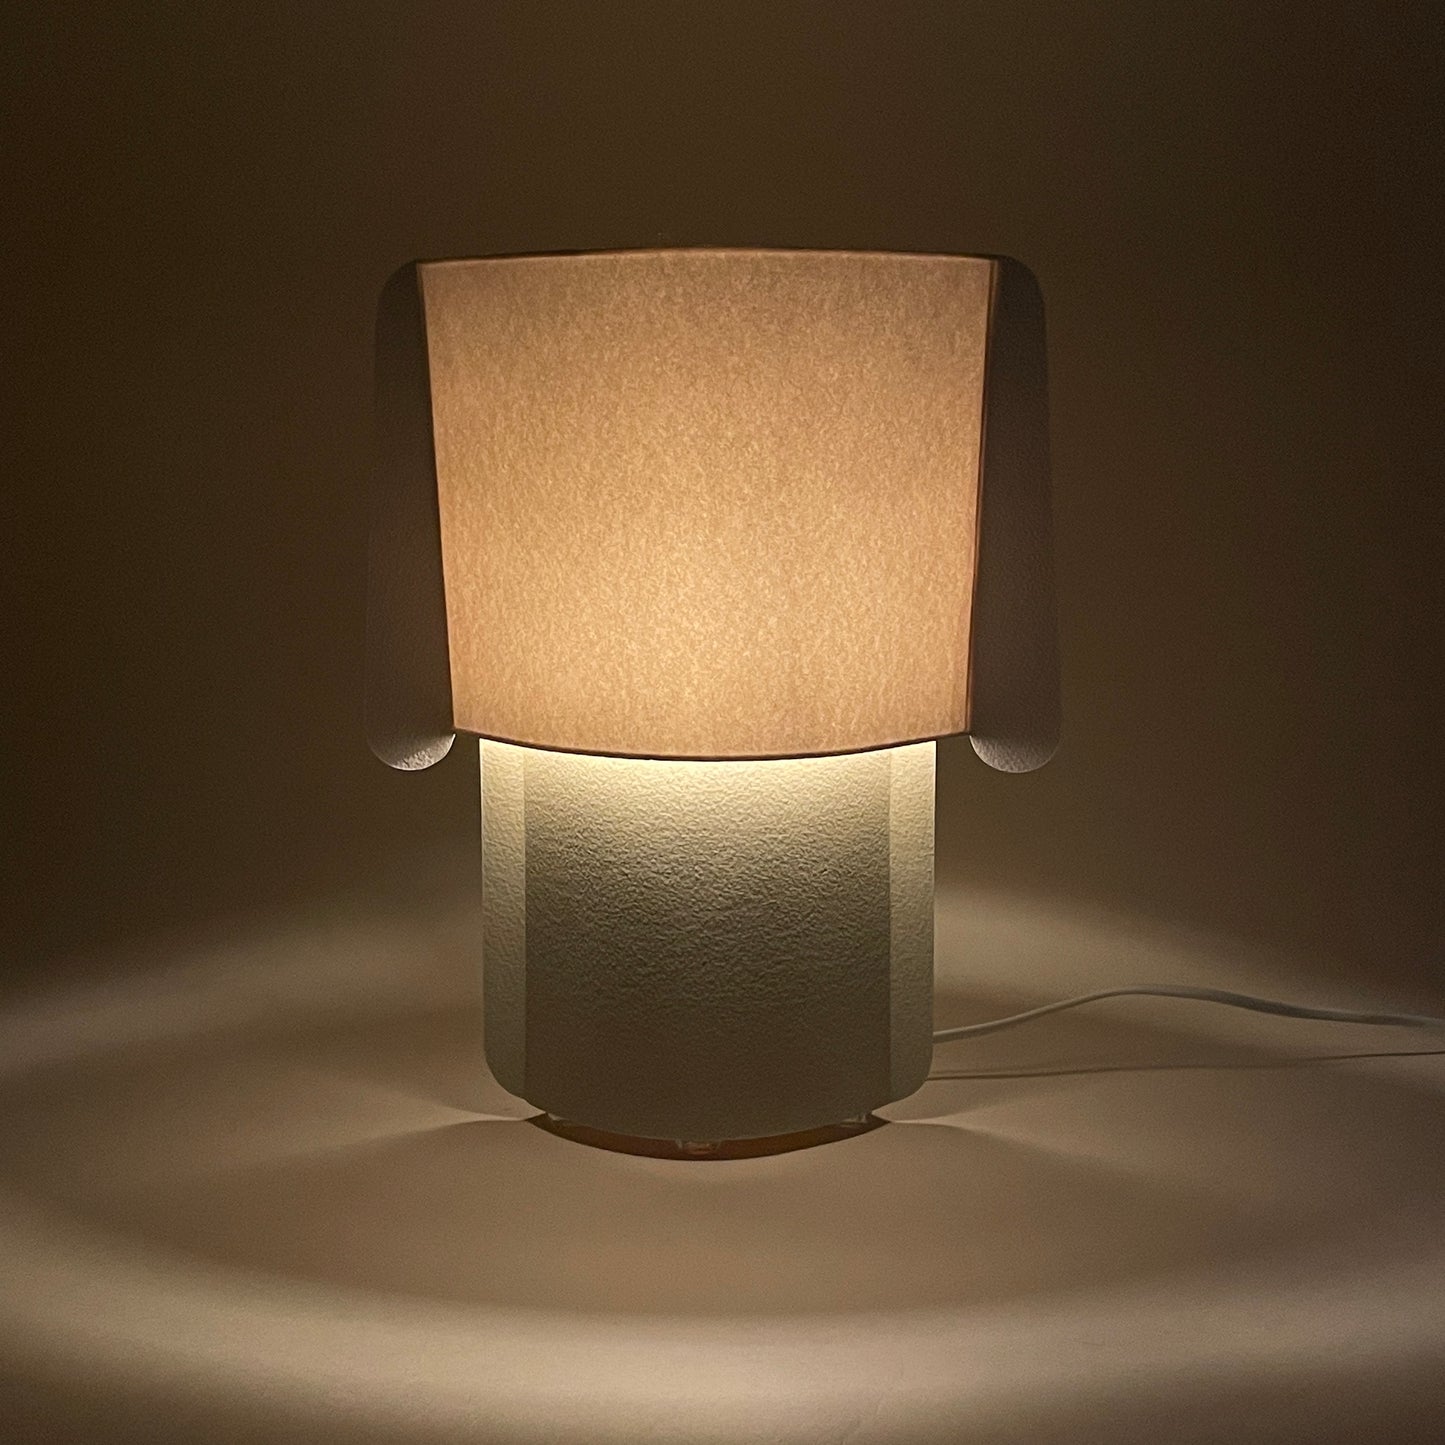 Sage and white Aquarelle Lamp by Adrian Bursell